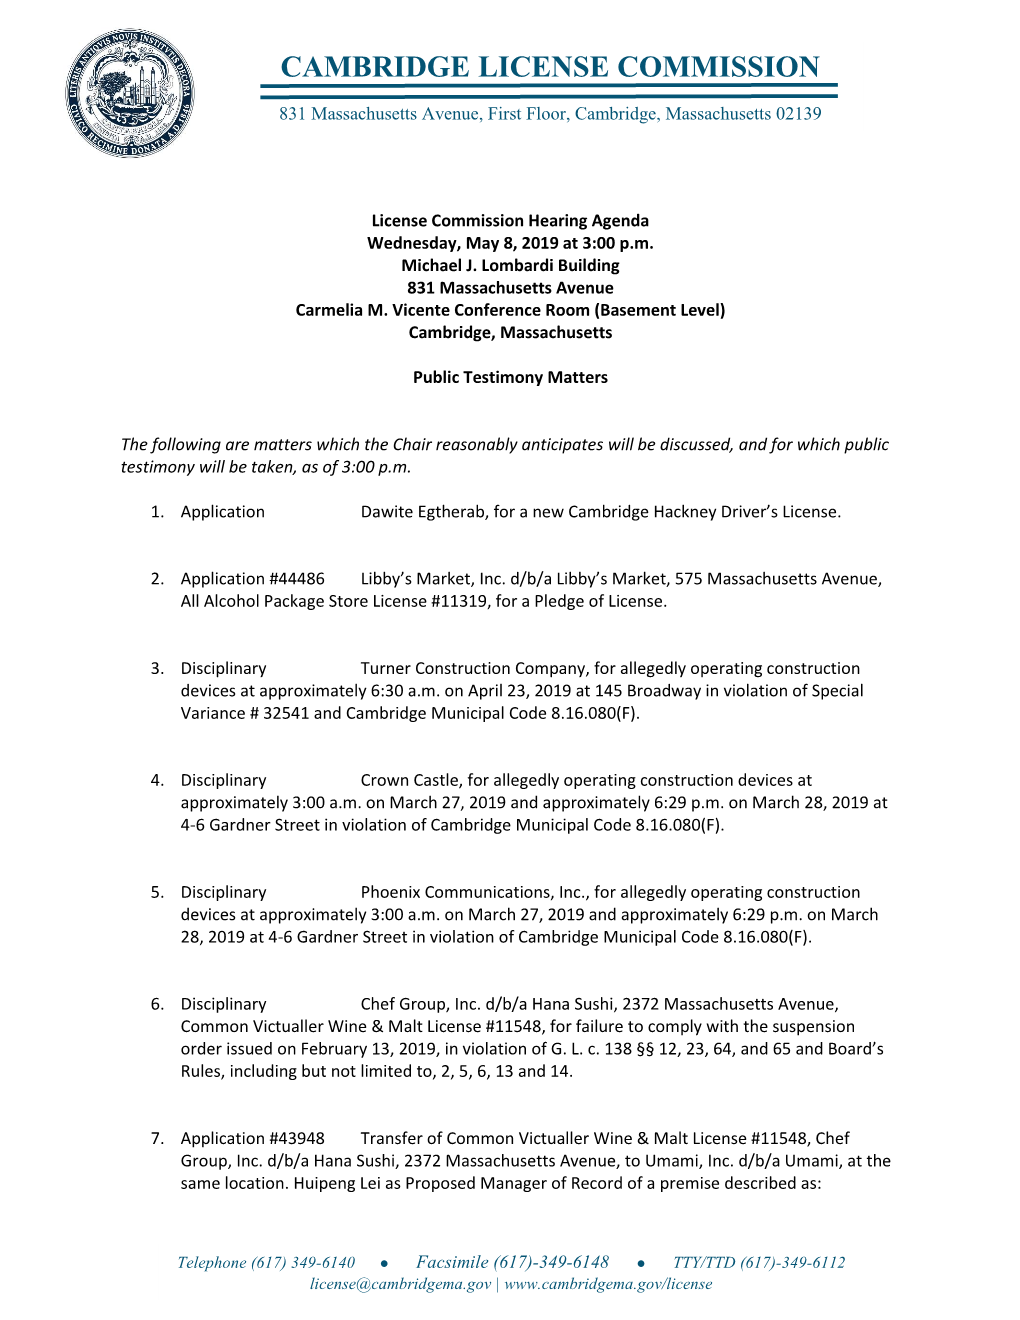 License Commission Hearing Agenda for May 8, 2019